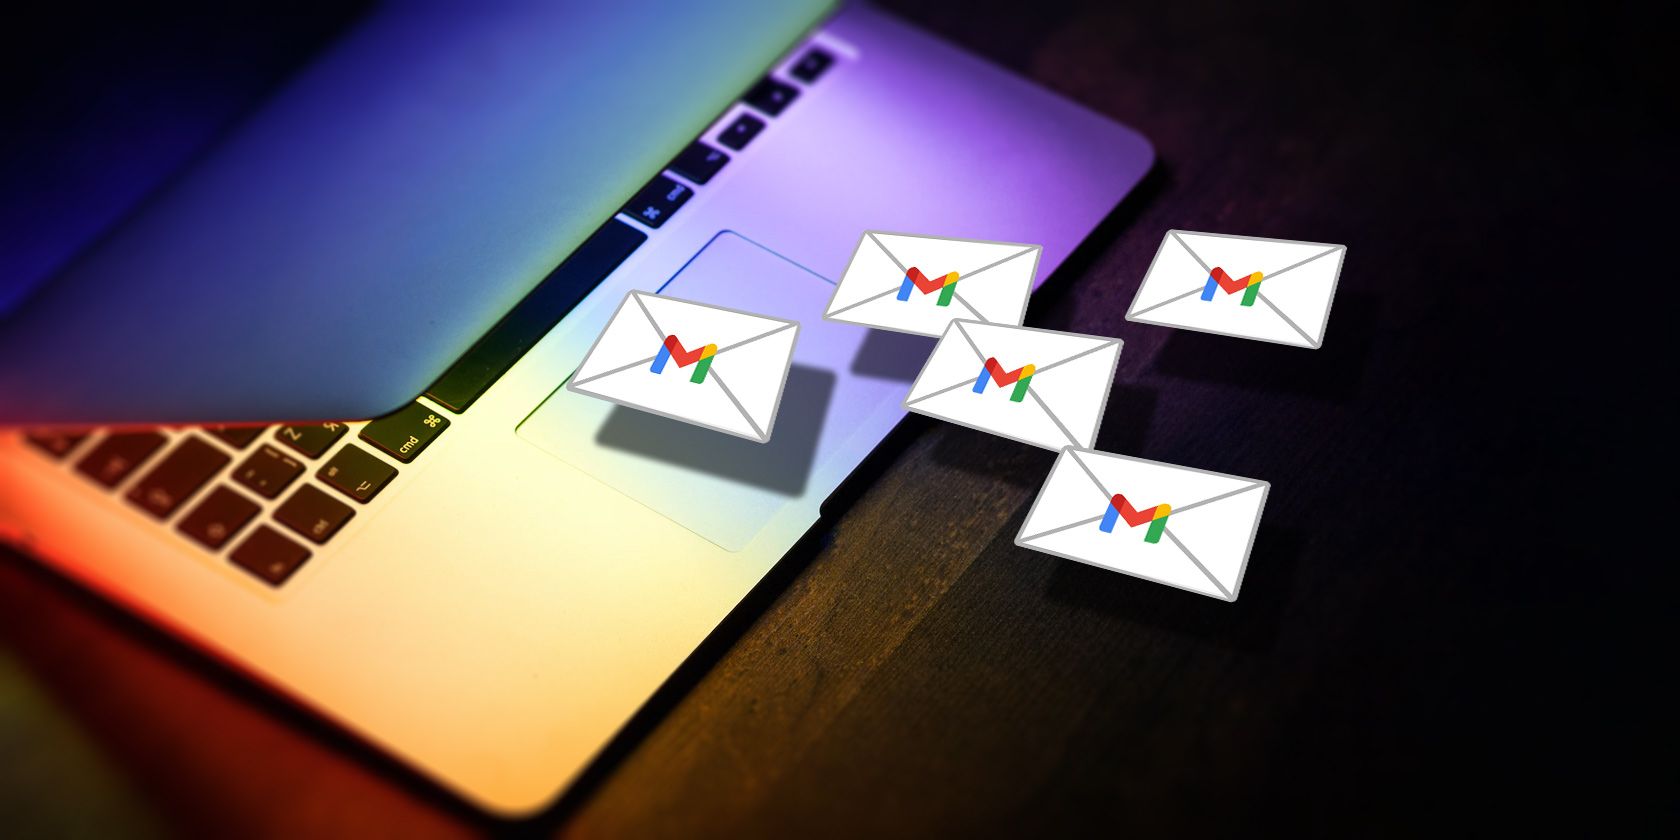 Envelopes with gmail logo flying out of laptop